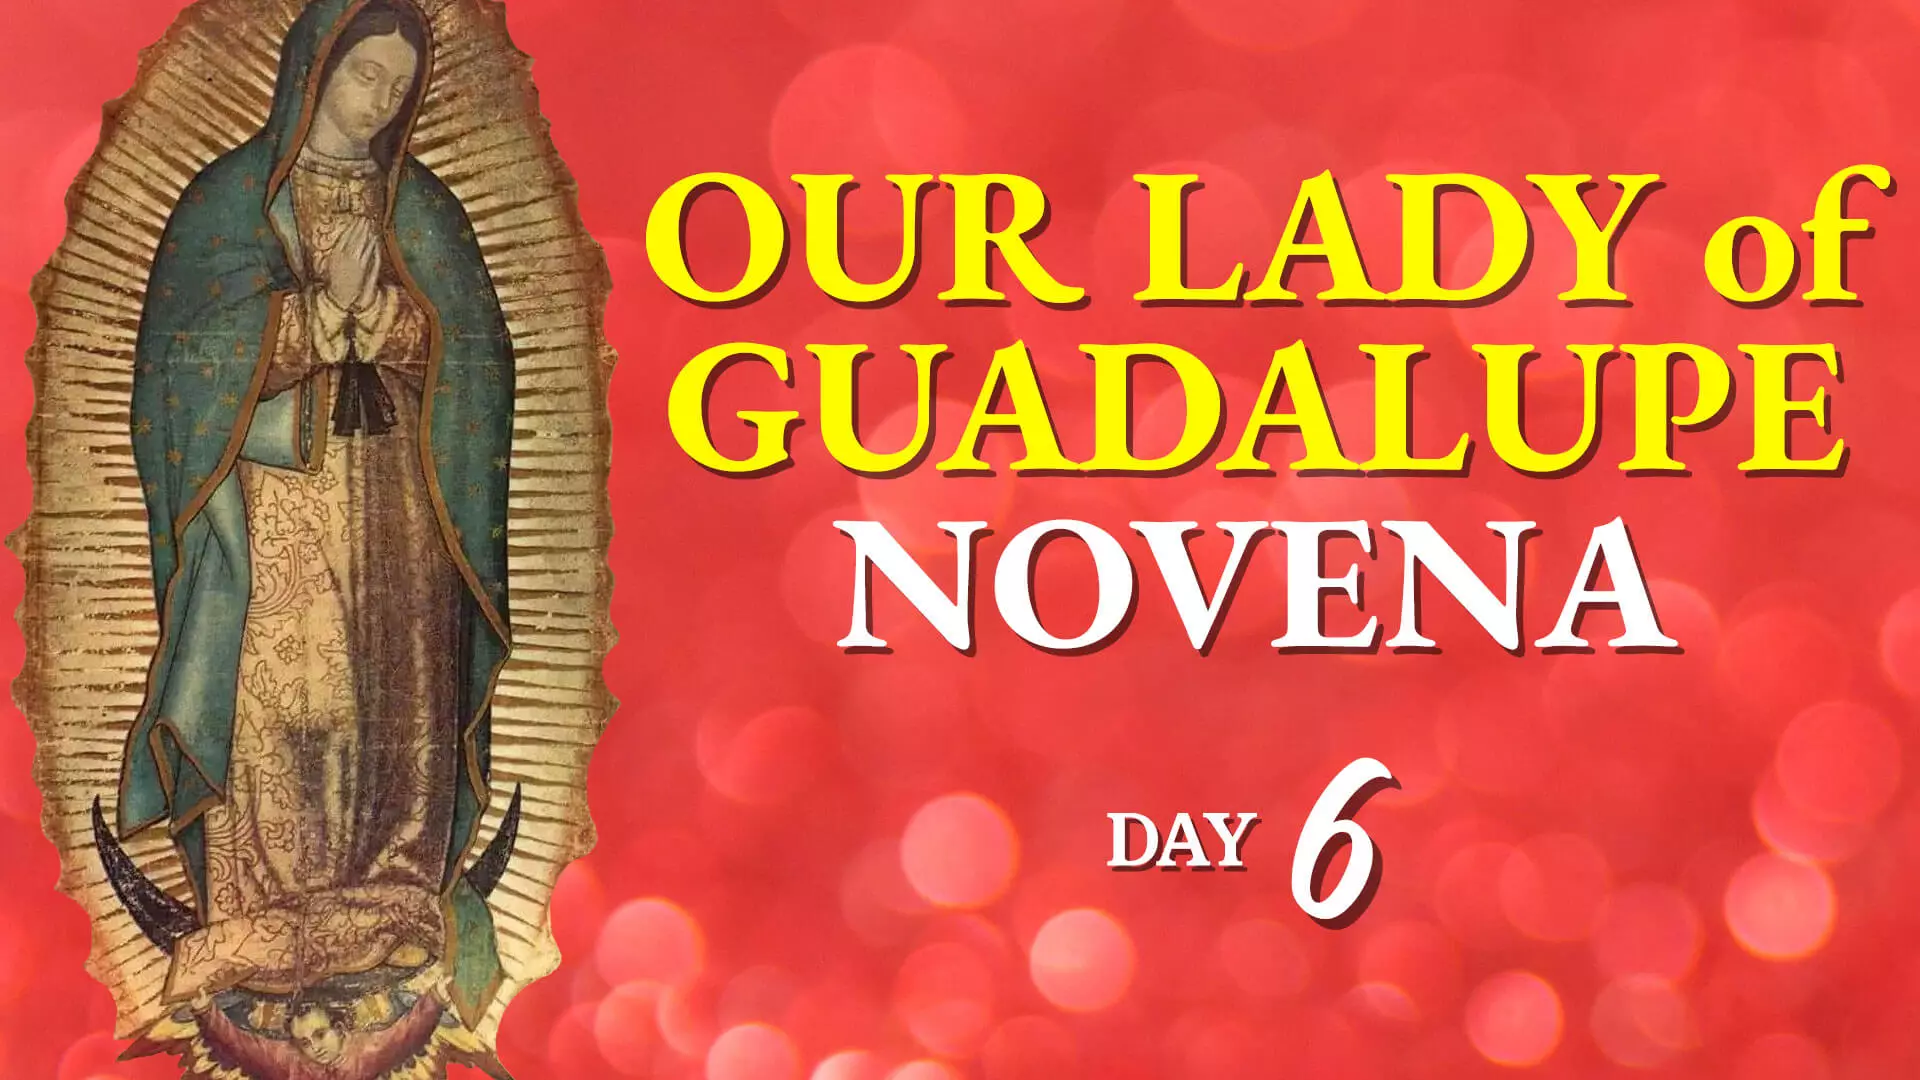 Our Lady of Guadalupe Novena Day 6